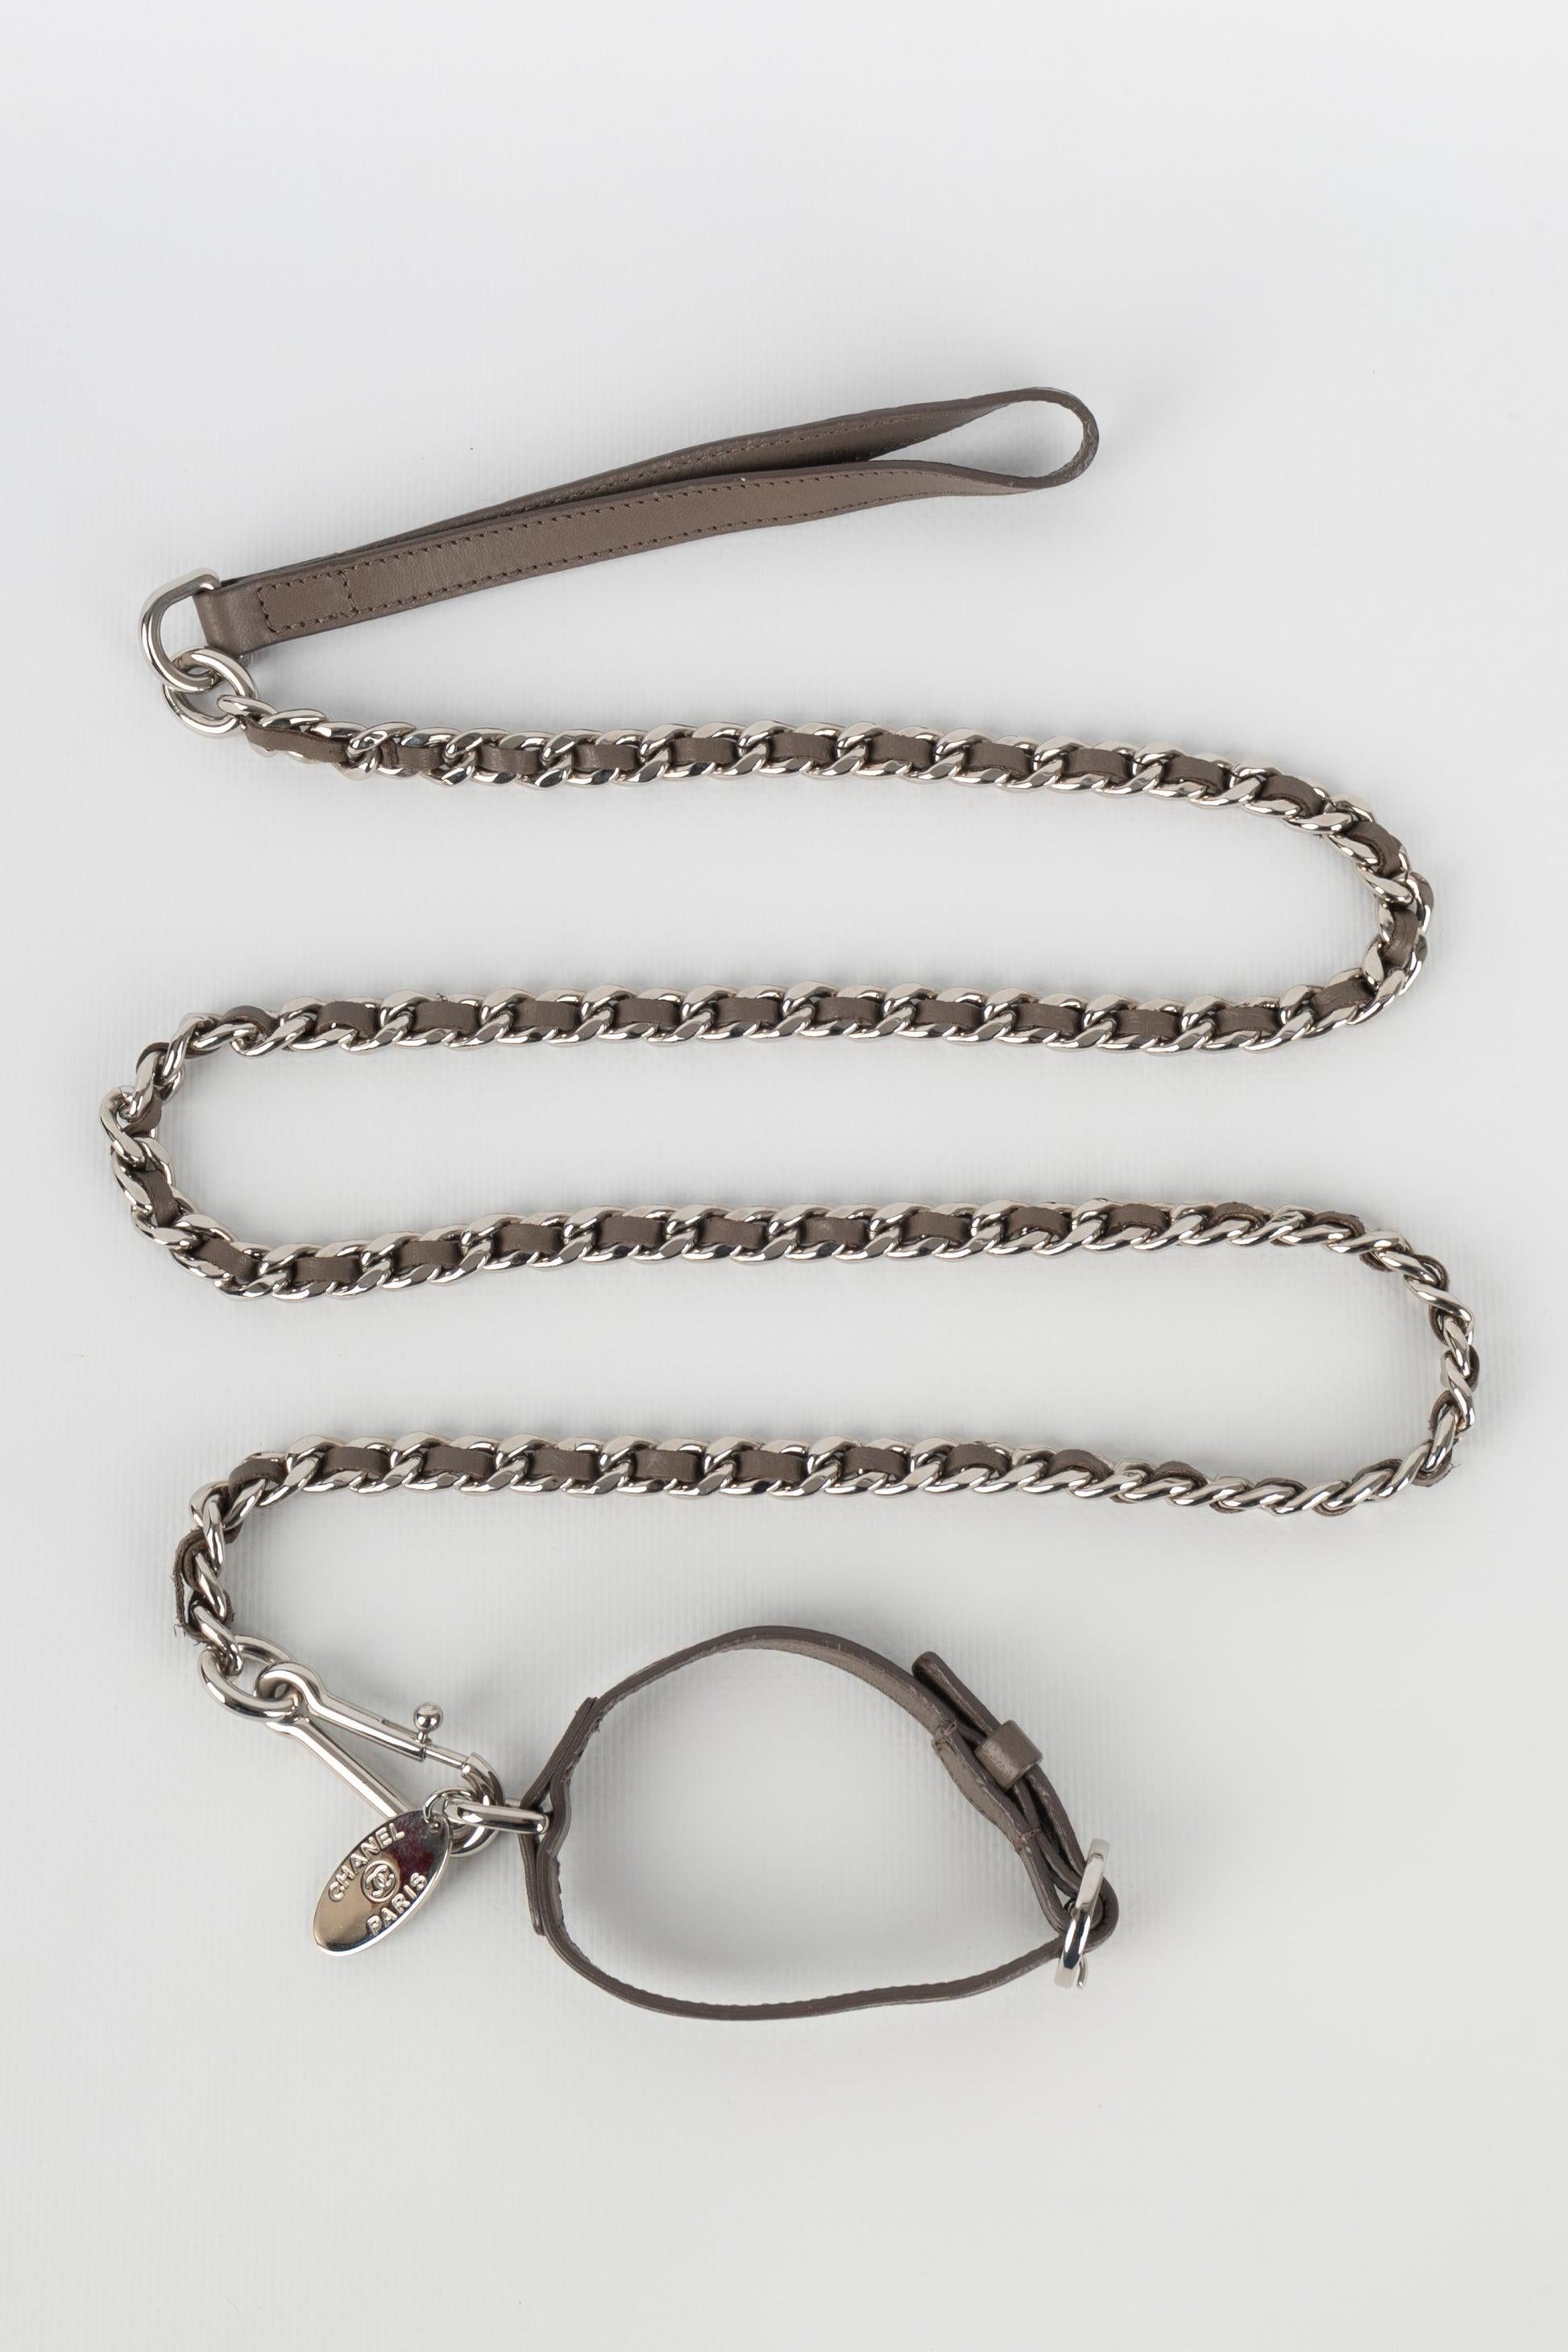 Chanel - Silvery metal leash interlaced with leather.

Additional information:
Condition: Very good condition
Dimensions: Length: 120 cm - Neck circumference: 21 cm to 25 cm

Seller Reference: ACC6